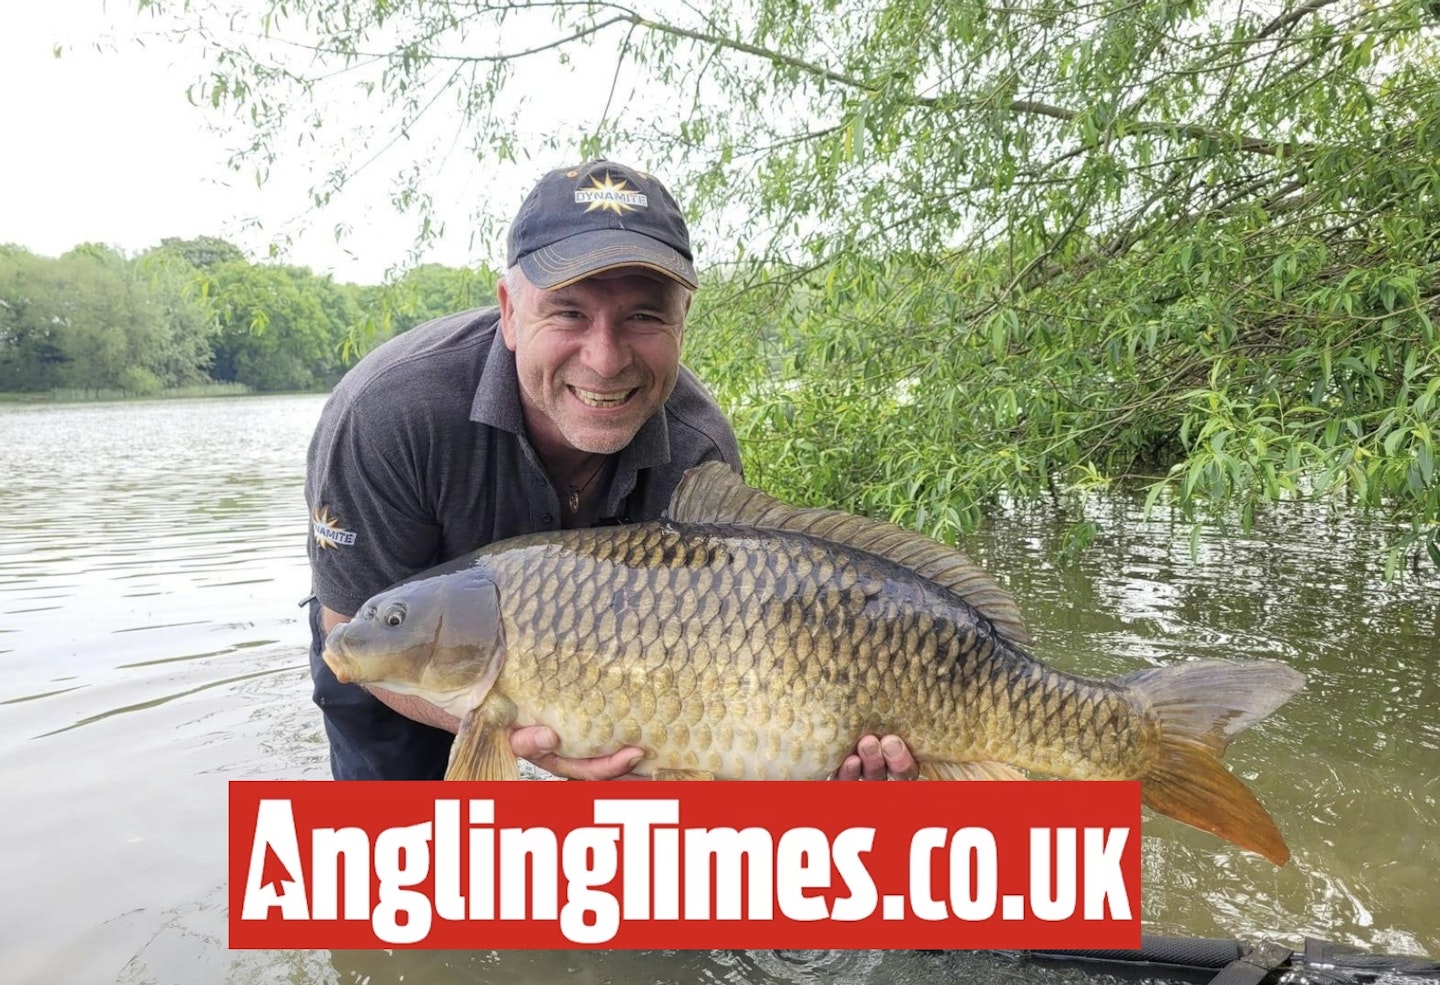 Nick Speed bags enormous carp on first cast of the day!